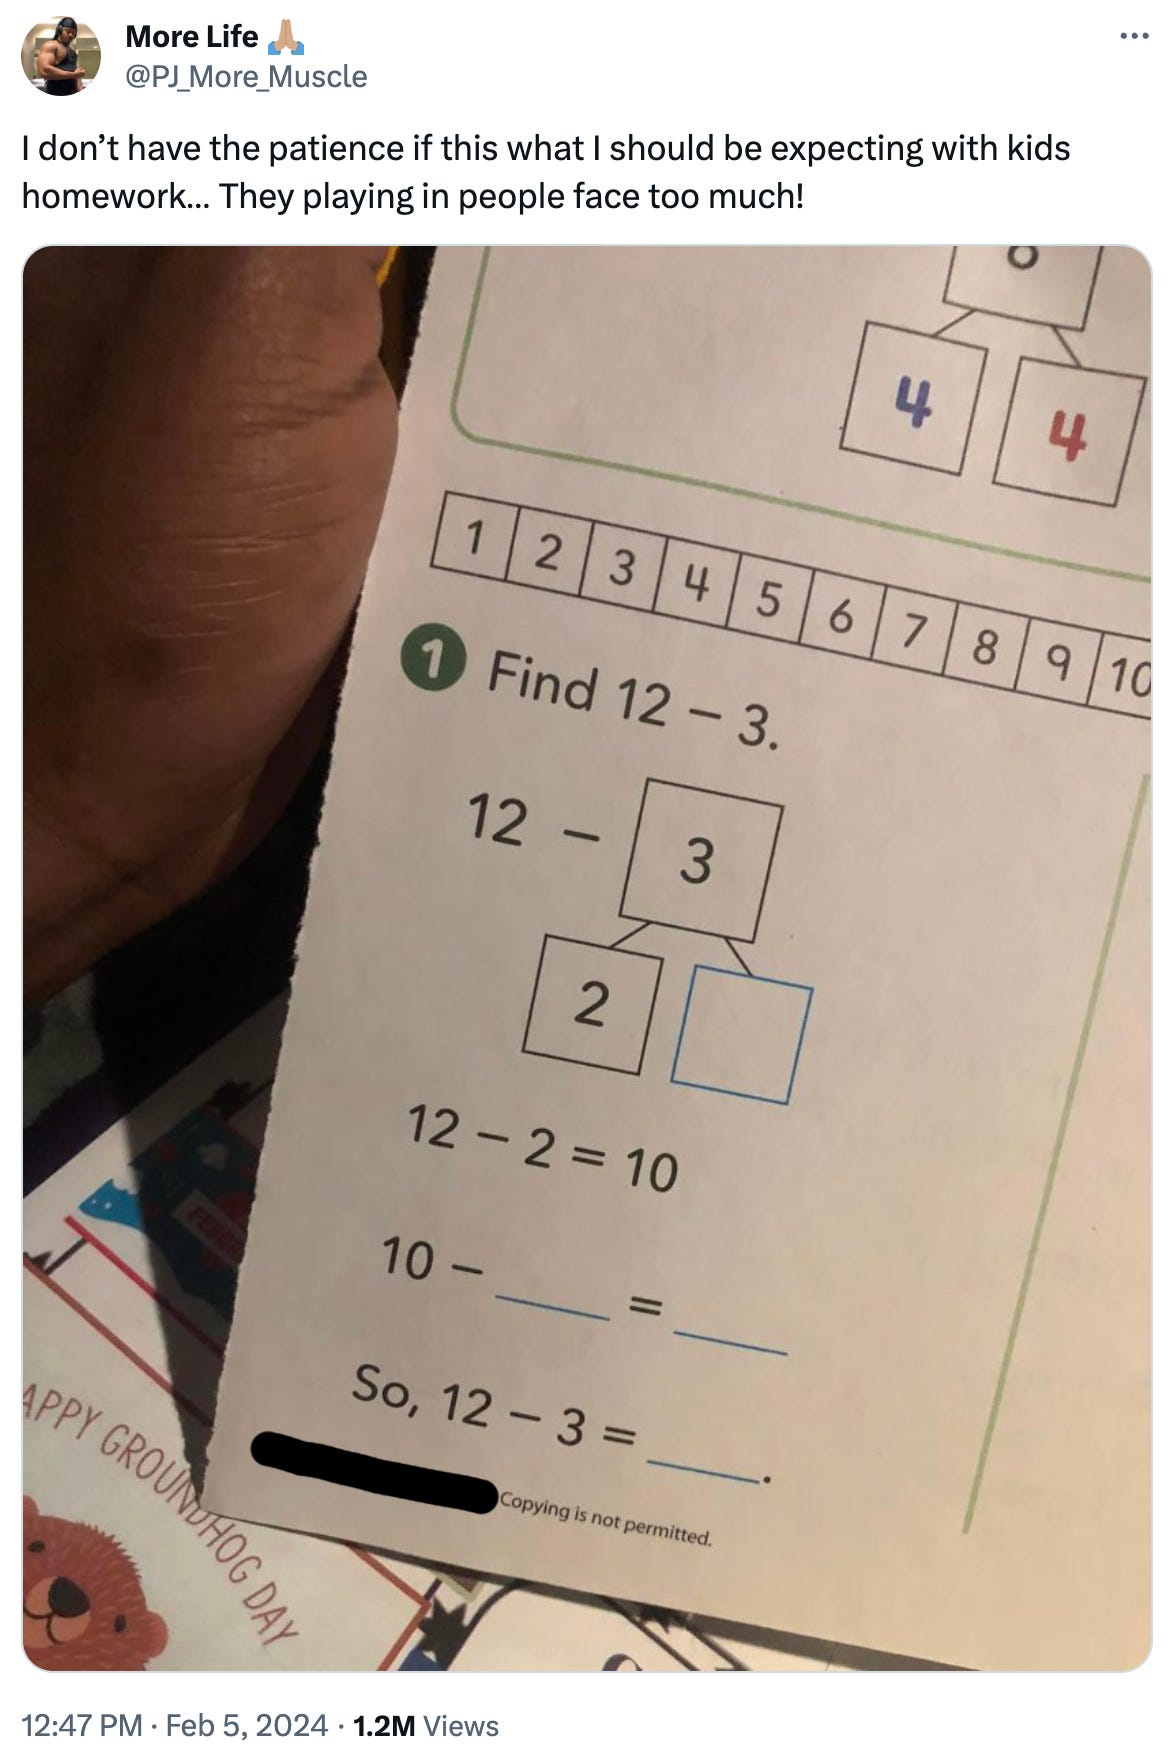 A parent tweets, "I don’t have the patience if this what I should be expecting with kids homework… They playing in people face too much!" above the image of a kid being asked to find 12-3 using a method called "making tens".